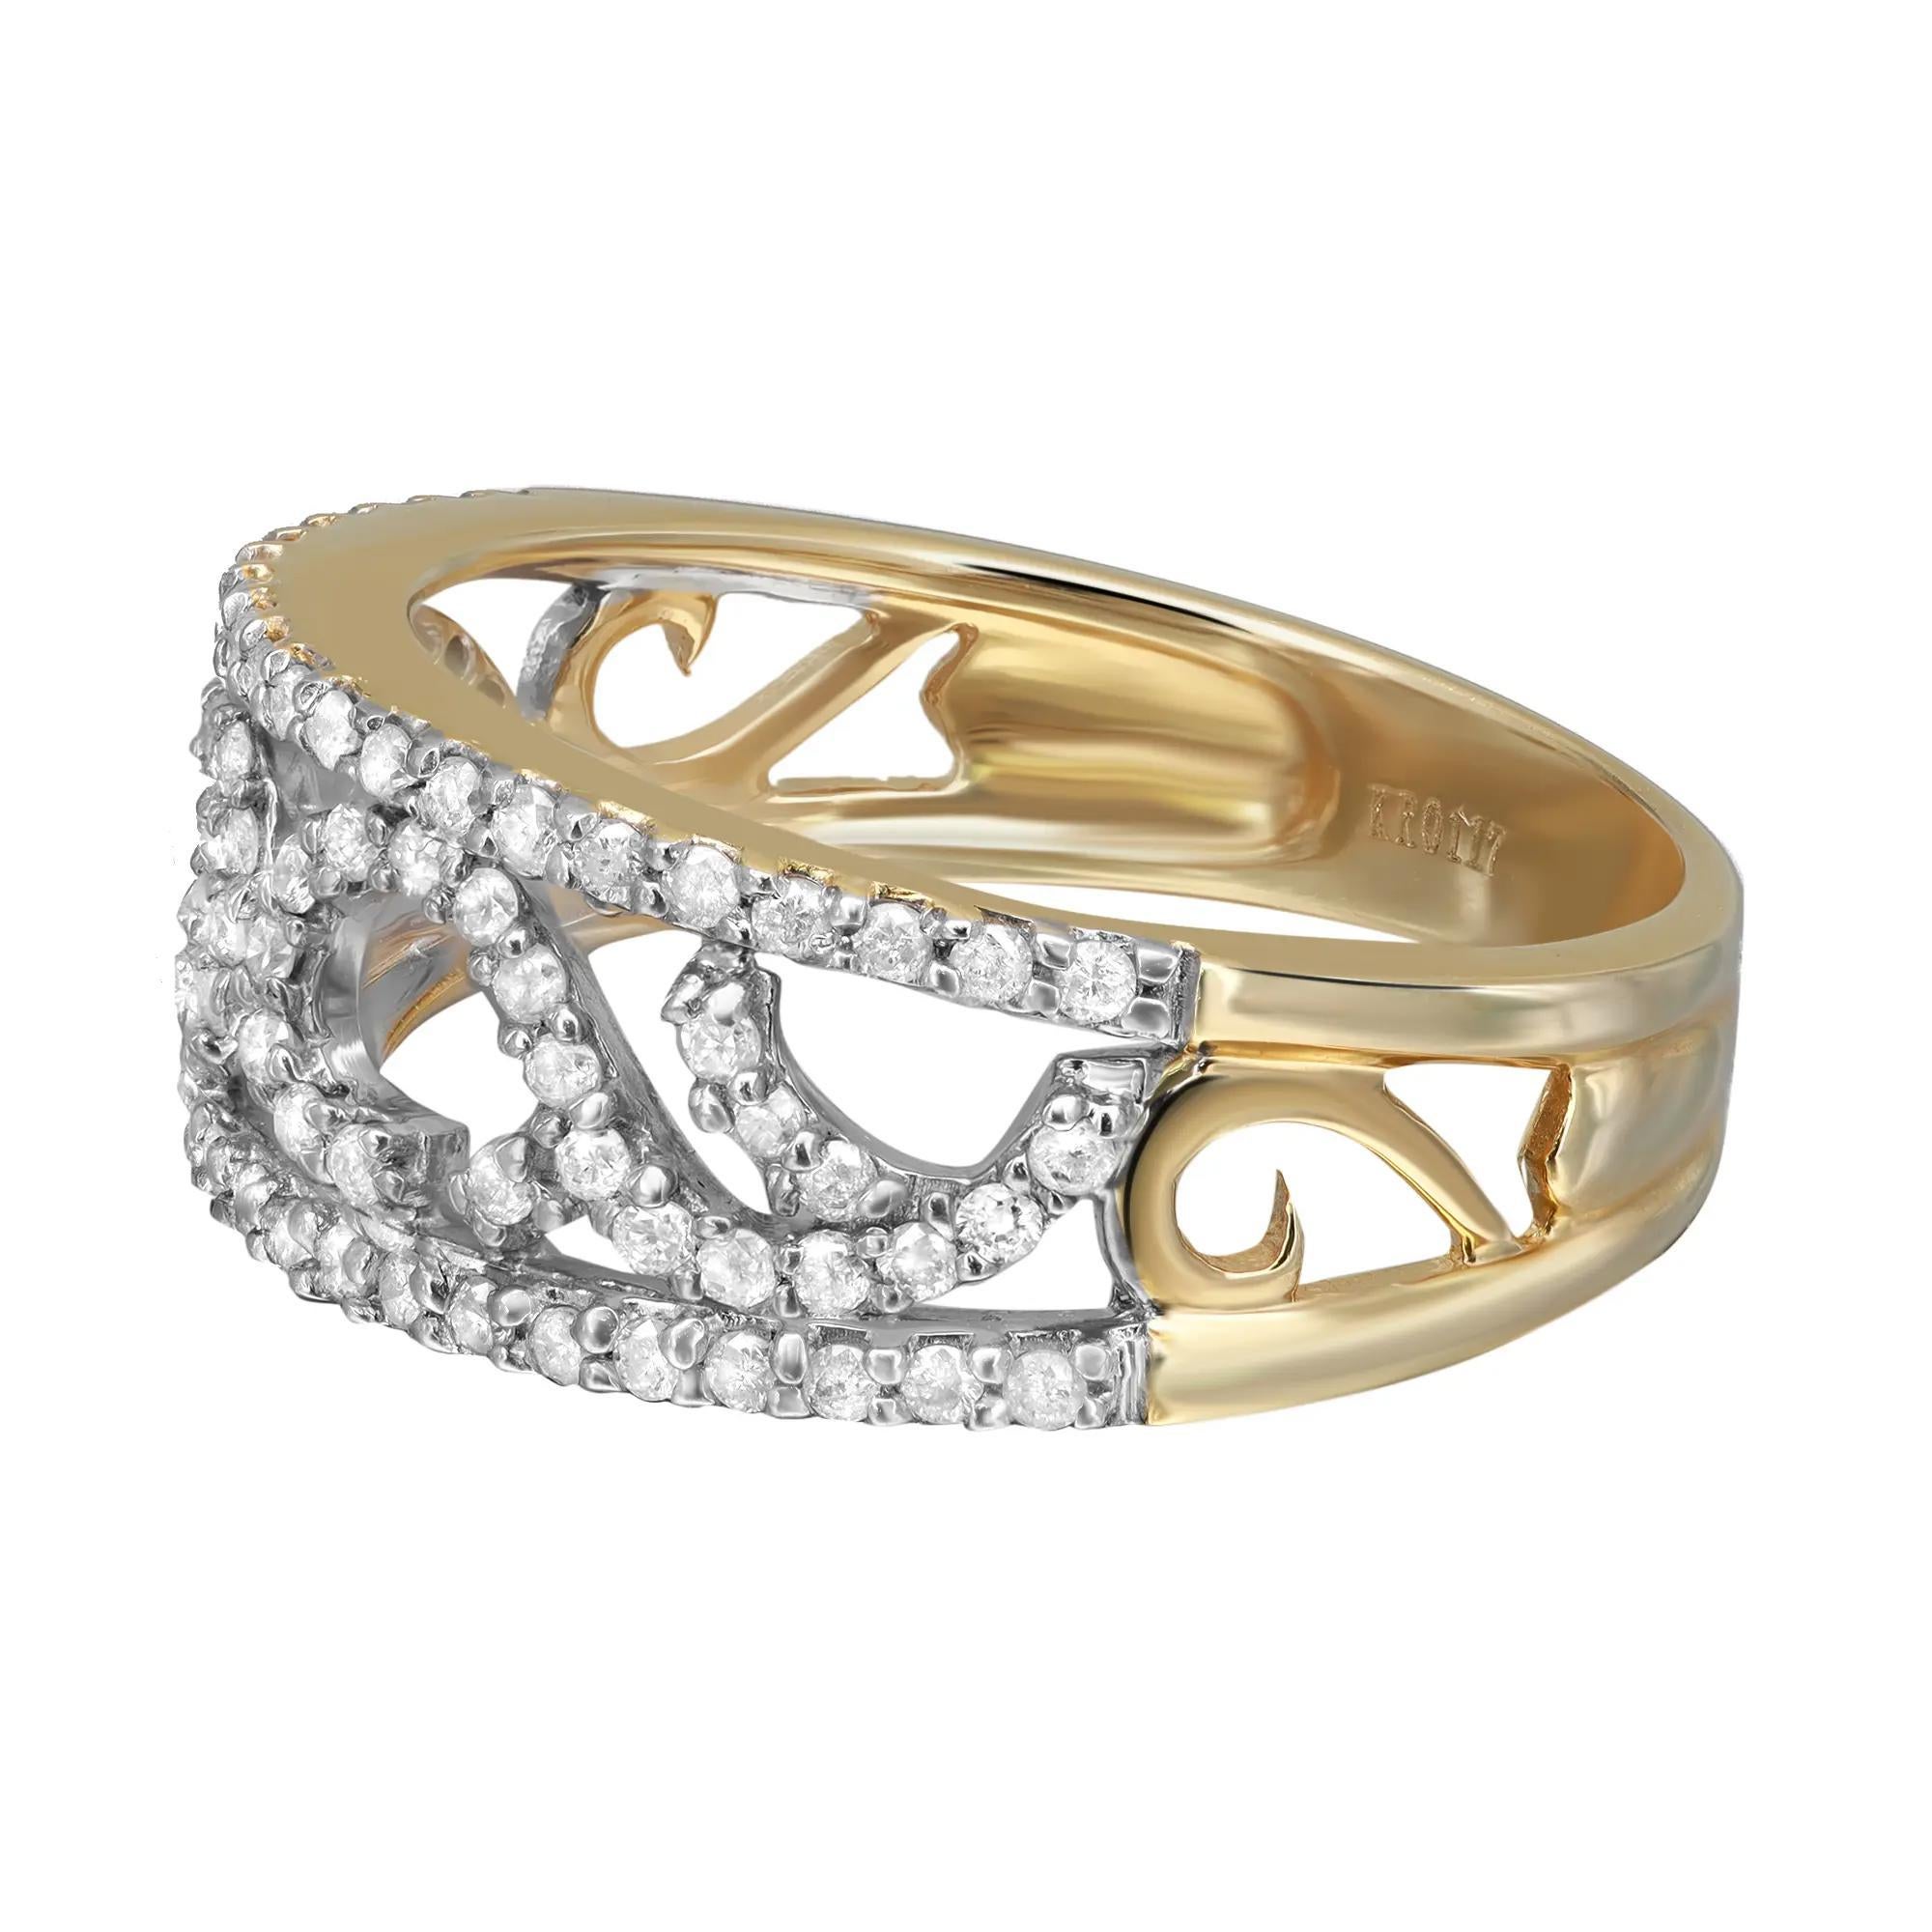 Modern ladies wide band ring crafted in 14k yellow gold. This ring features round cut diamonds encrusted in prong setting. Total diamond weight: 0.53 carat. Diamond quality: color I and clarity SI-I. Ring size: 7.5. Ring width: 8.6mm. Total weight: